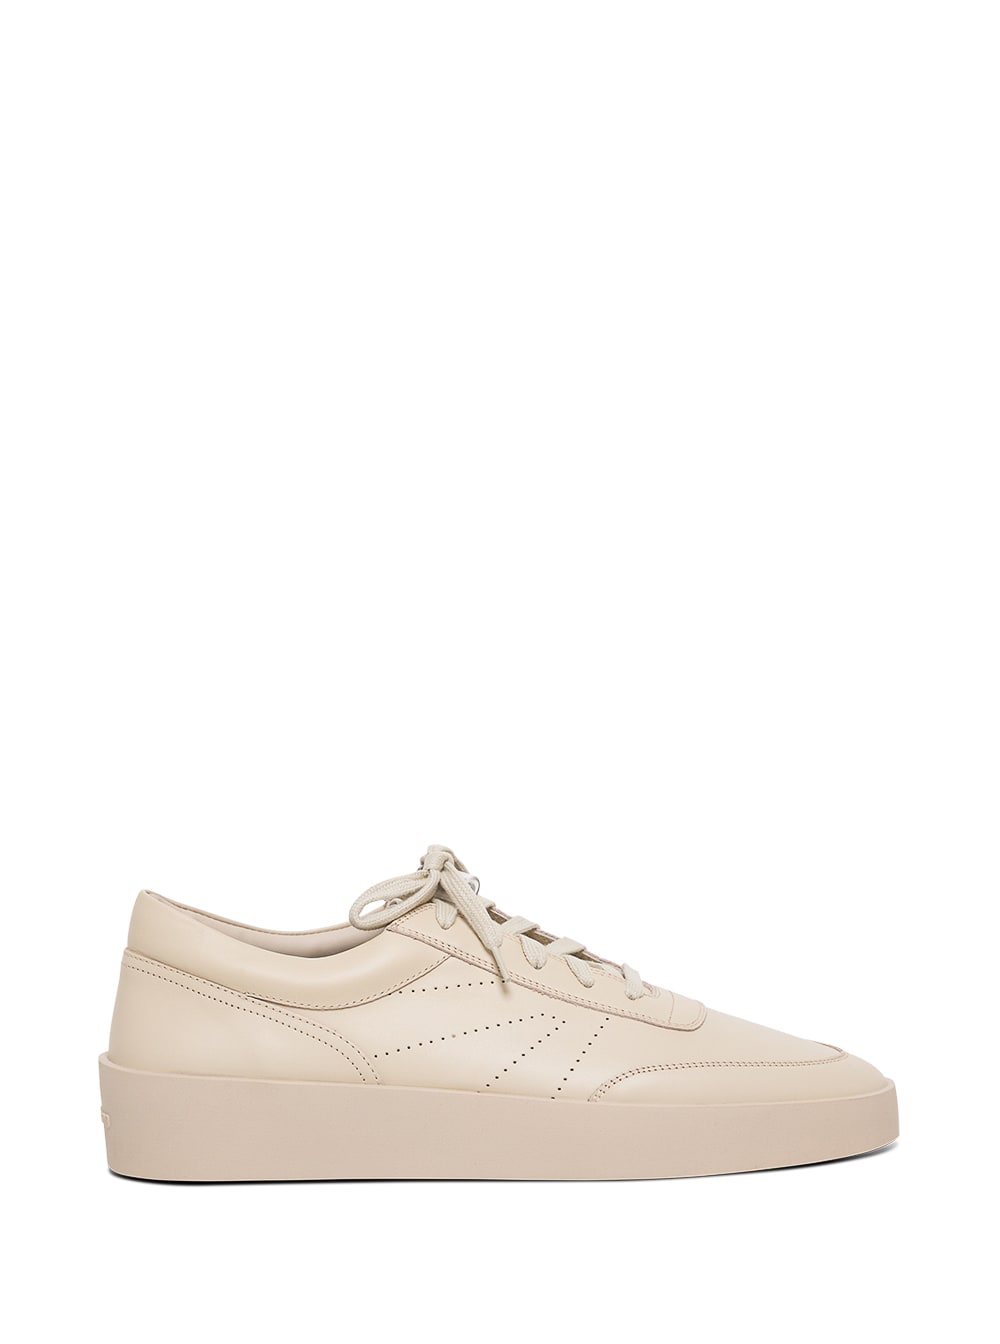 Fear of God Vintage Tennis Leather Sneakers